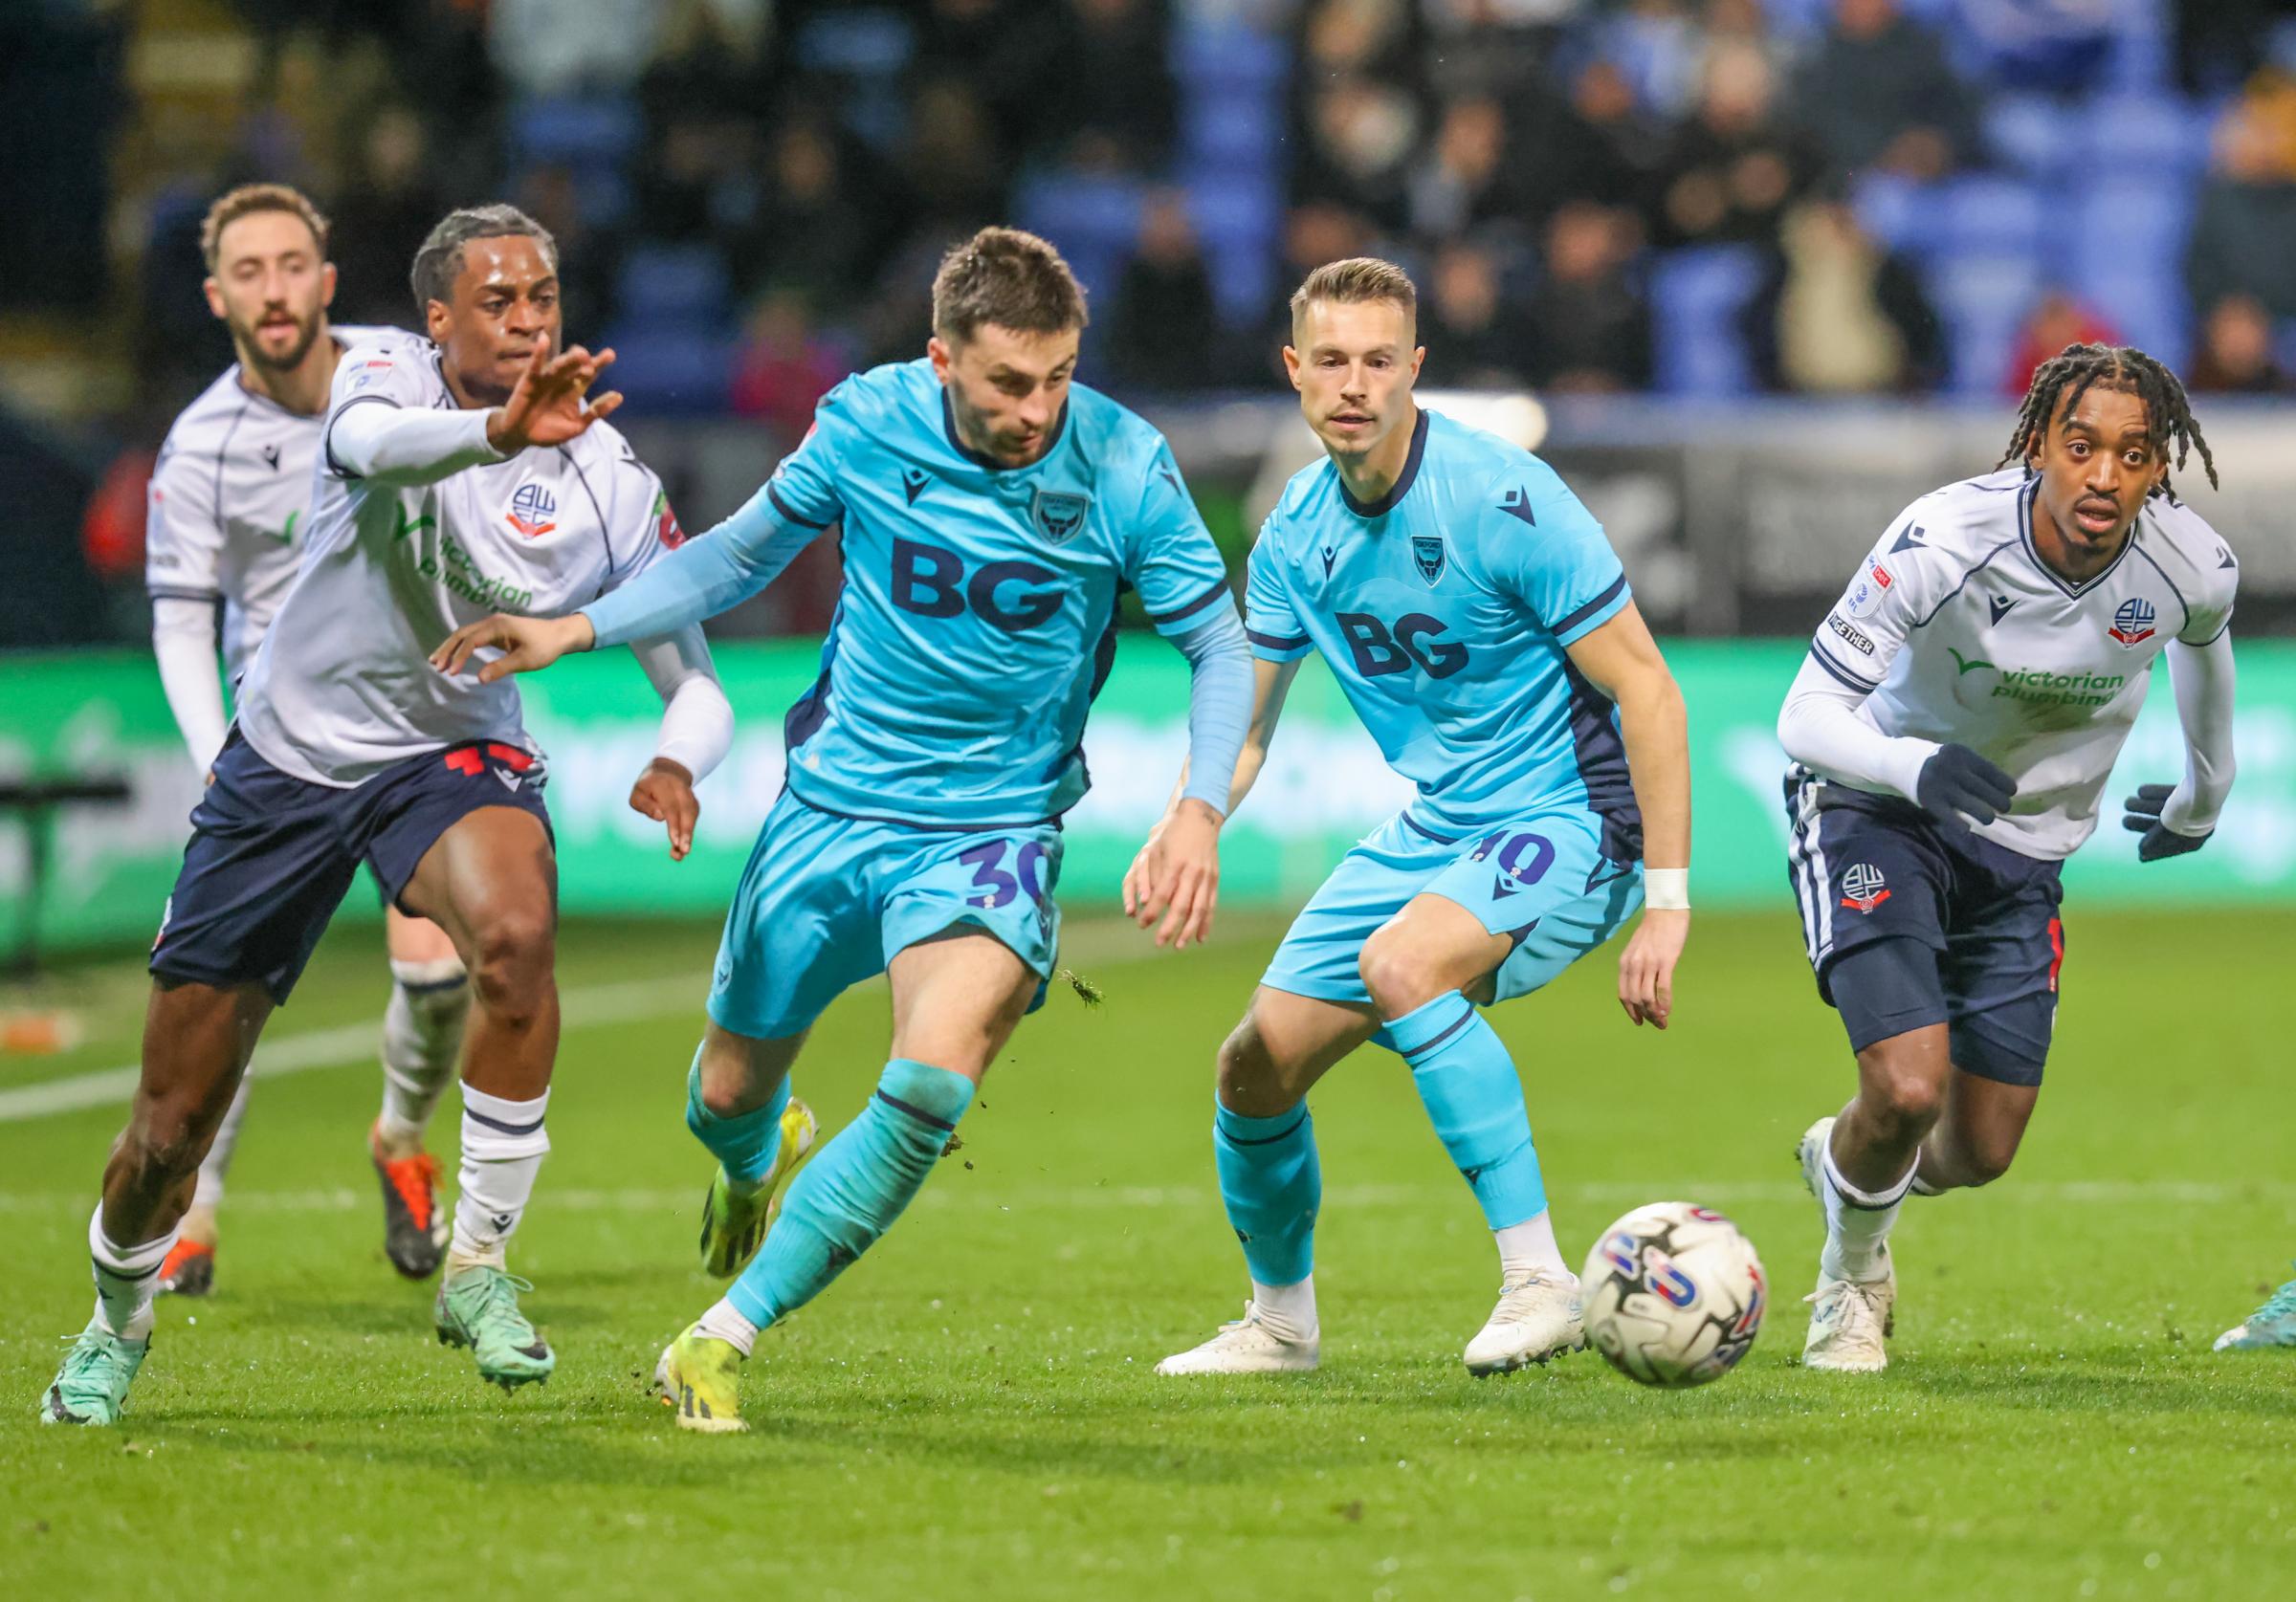 What must Oxford United learn from 5-0 defeat at Bolton Wanderers?